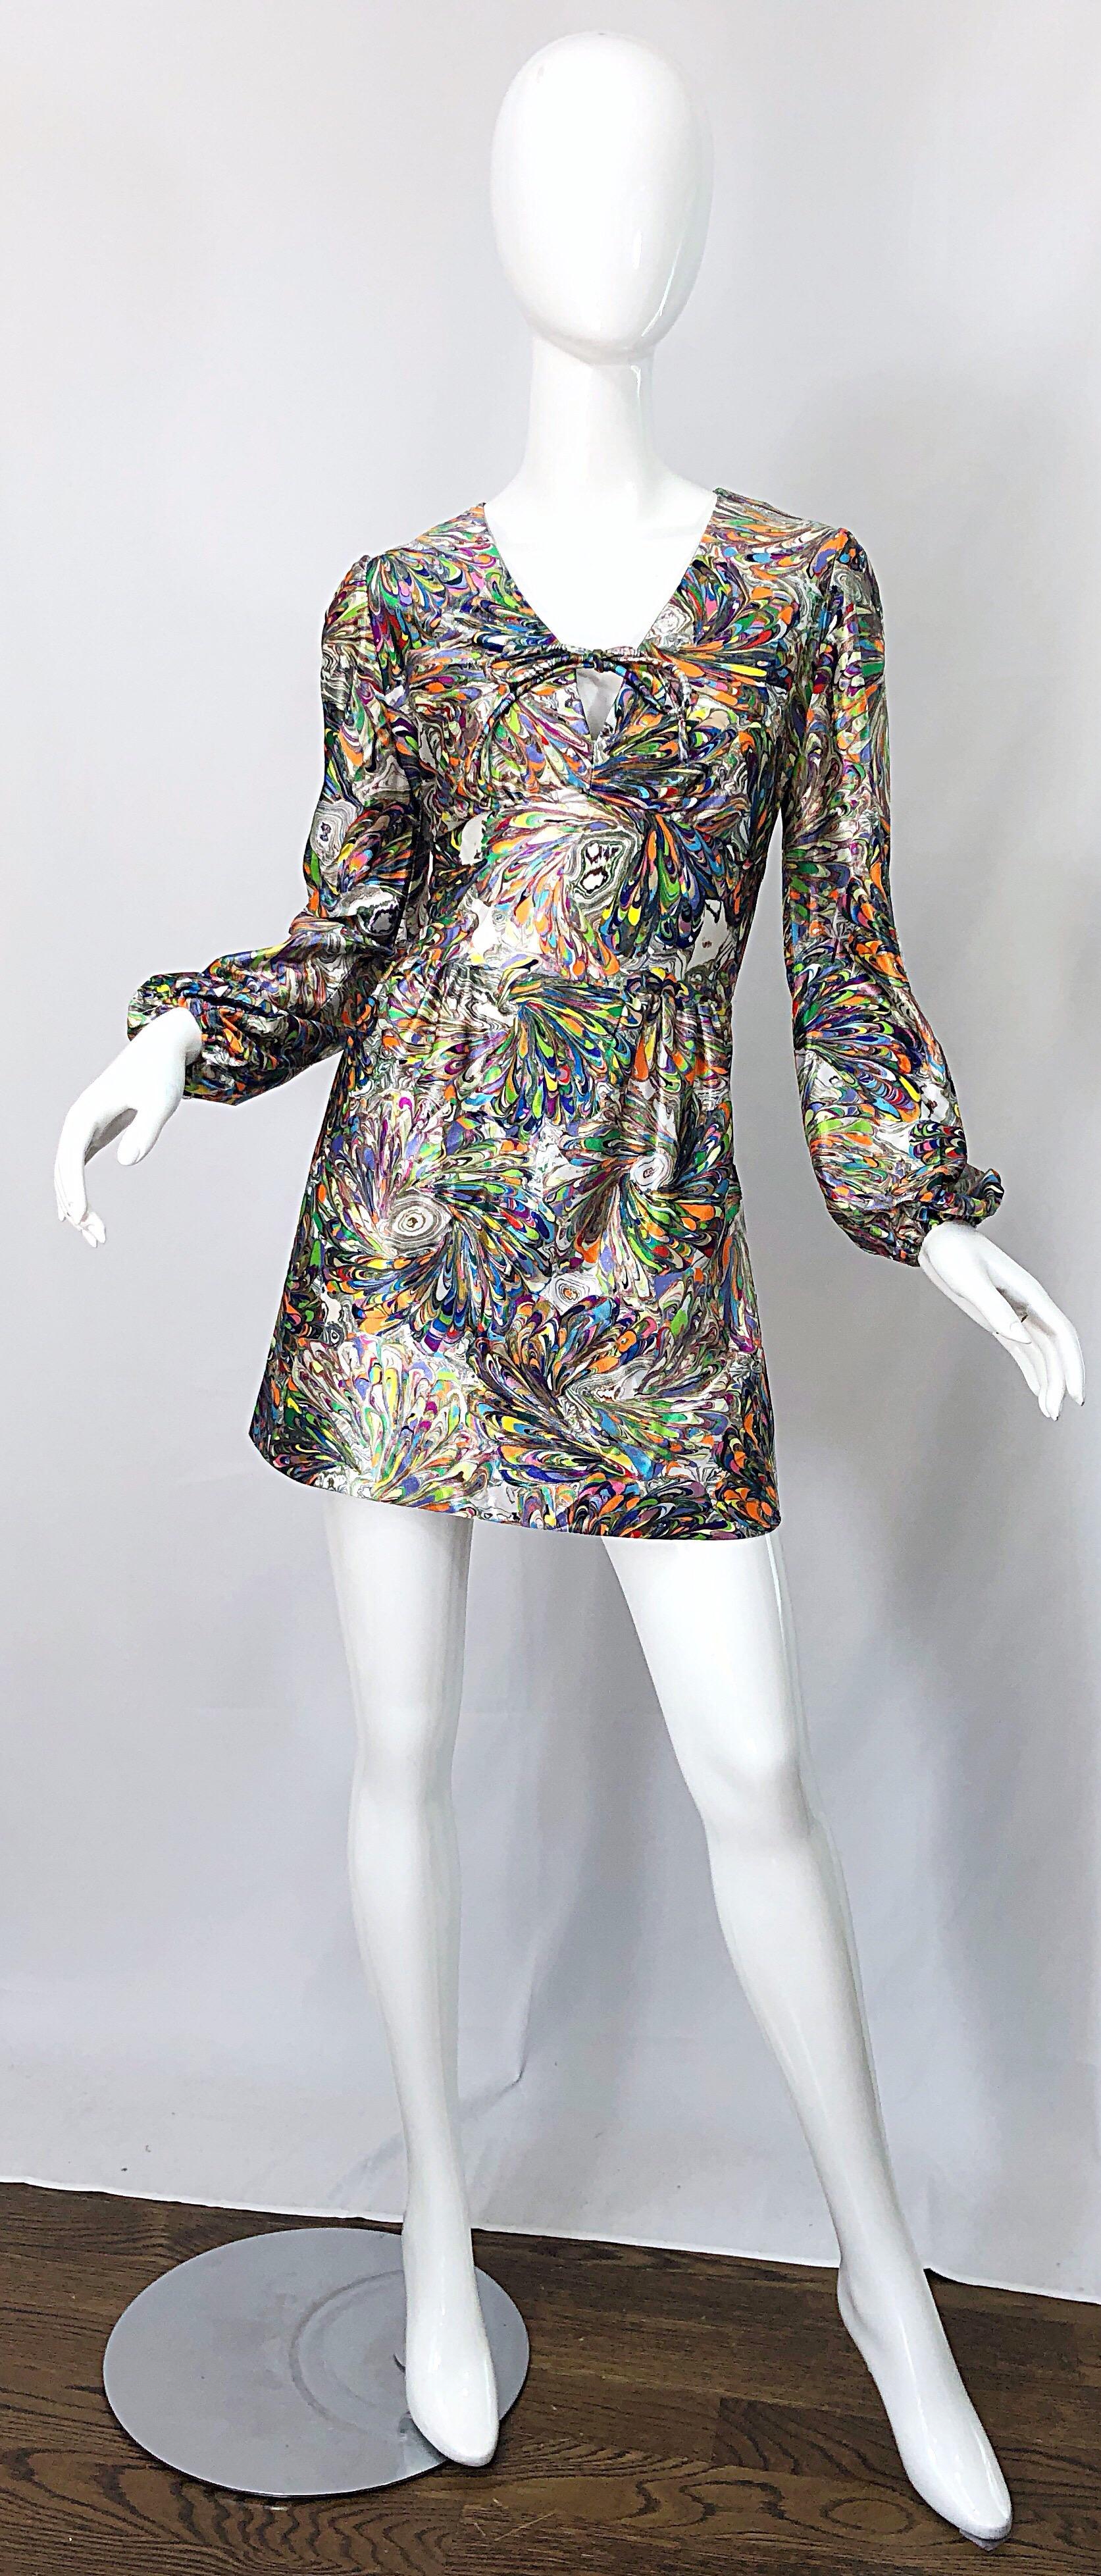 Amazing early 70 vibrant color mosaic swirl print bishop sleeve mini dress or tunic top ! Features a bright rainbow colors of purple, blue, neon green, orange, yellow, hot pink, and white throughout. Ties at center bust. Hidden zipper up the back